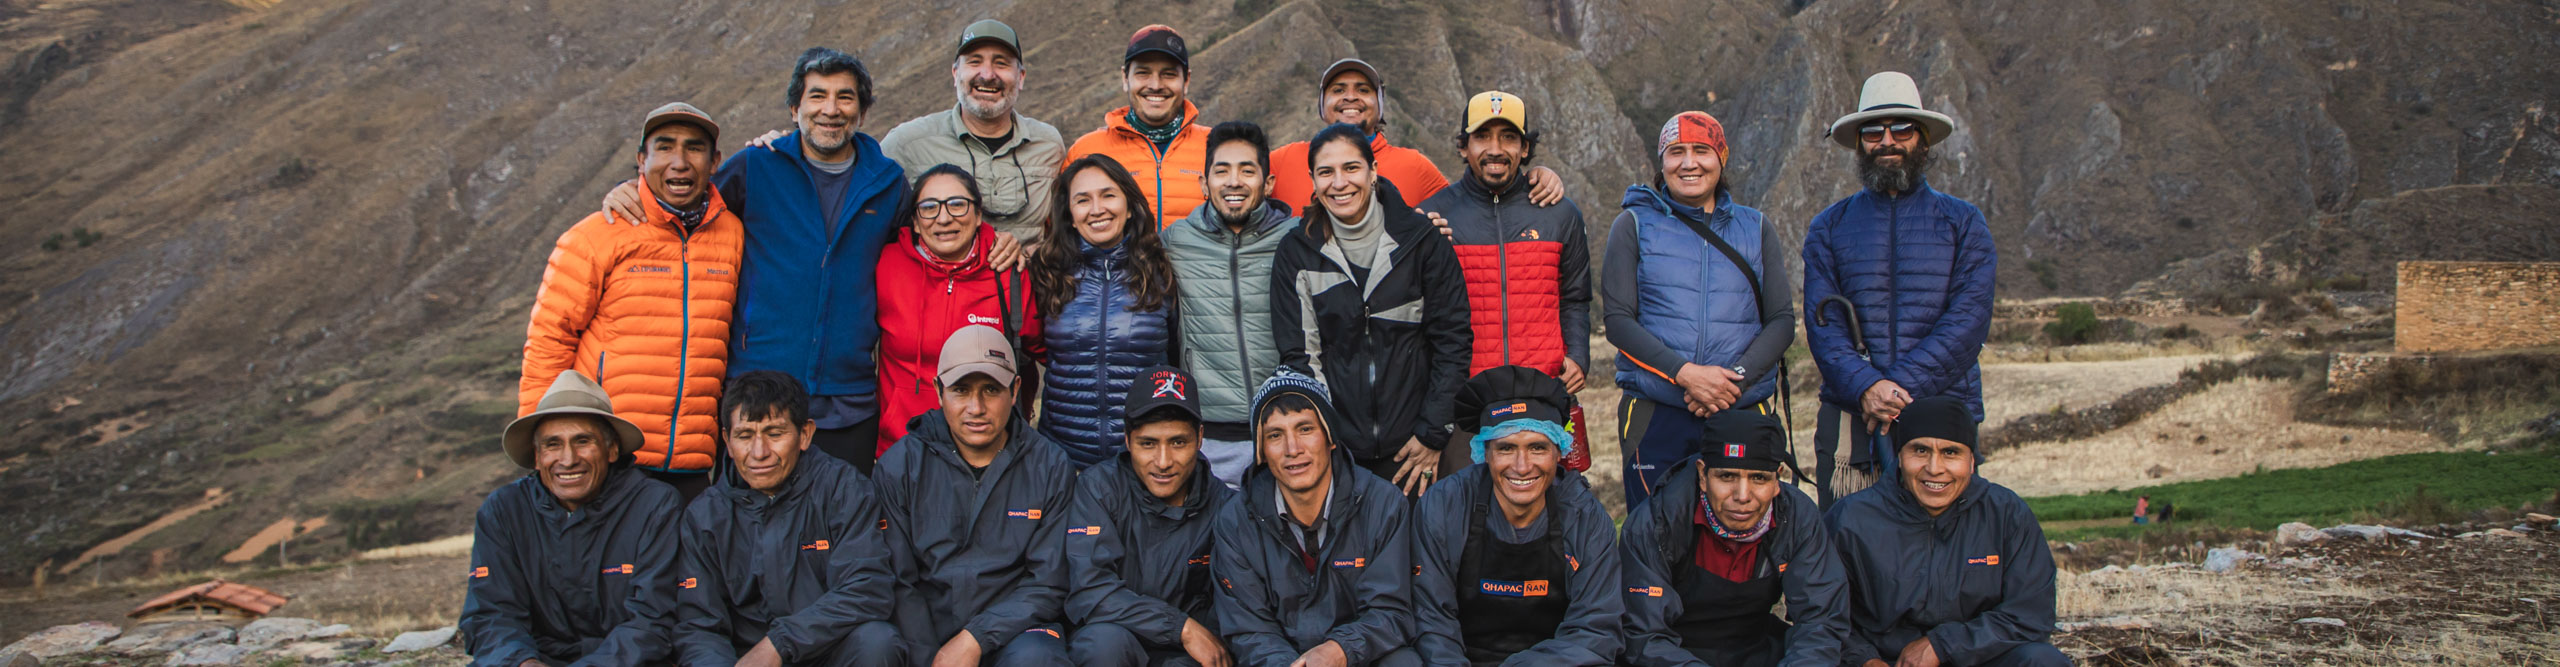 Group of people posing for a photo at the Great Inca Road